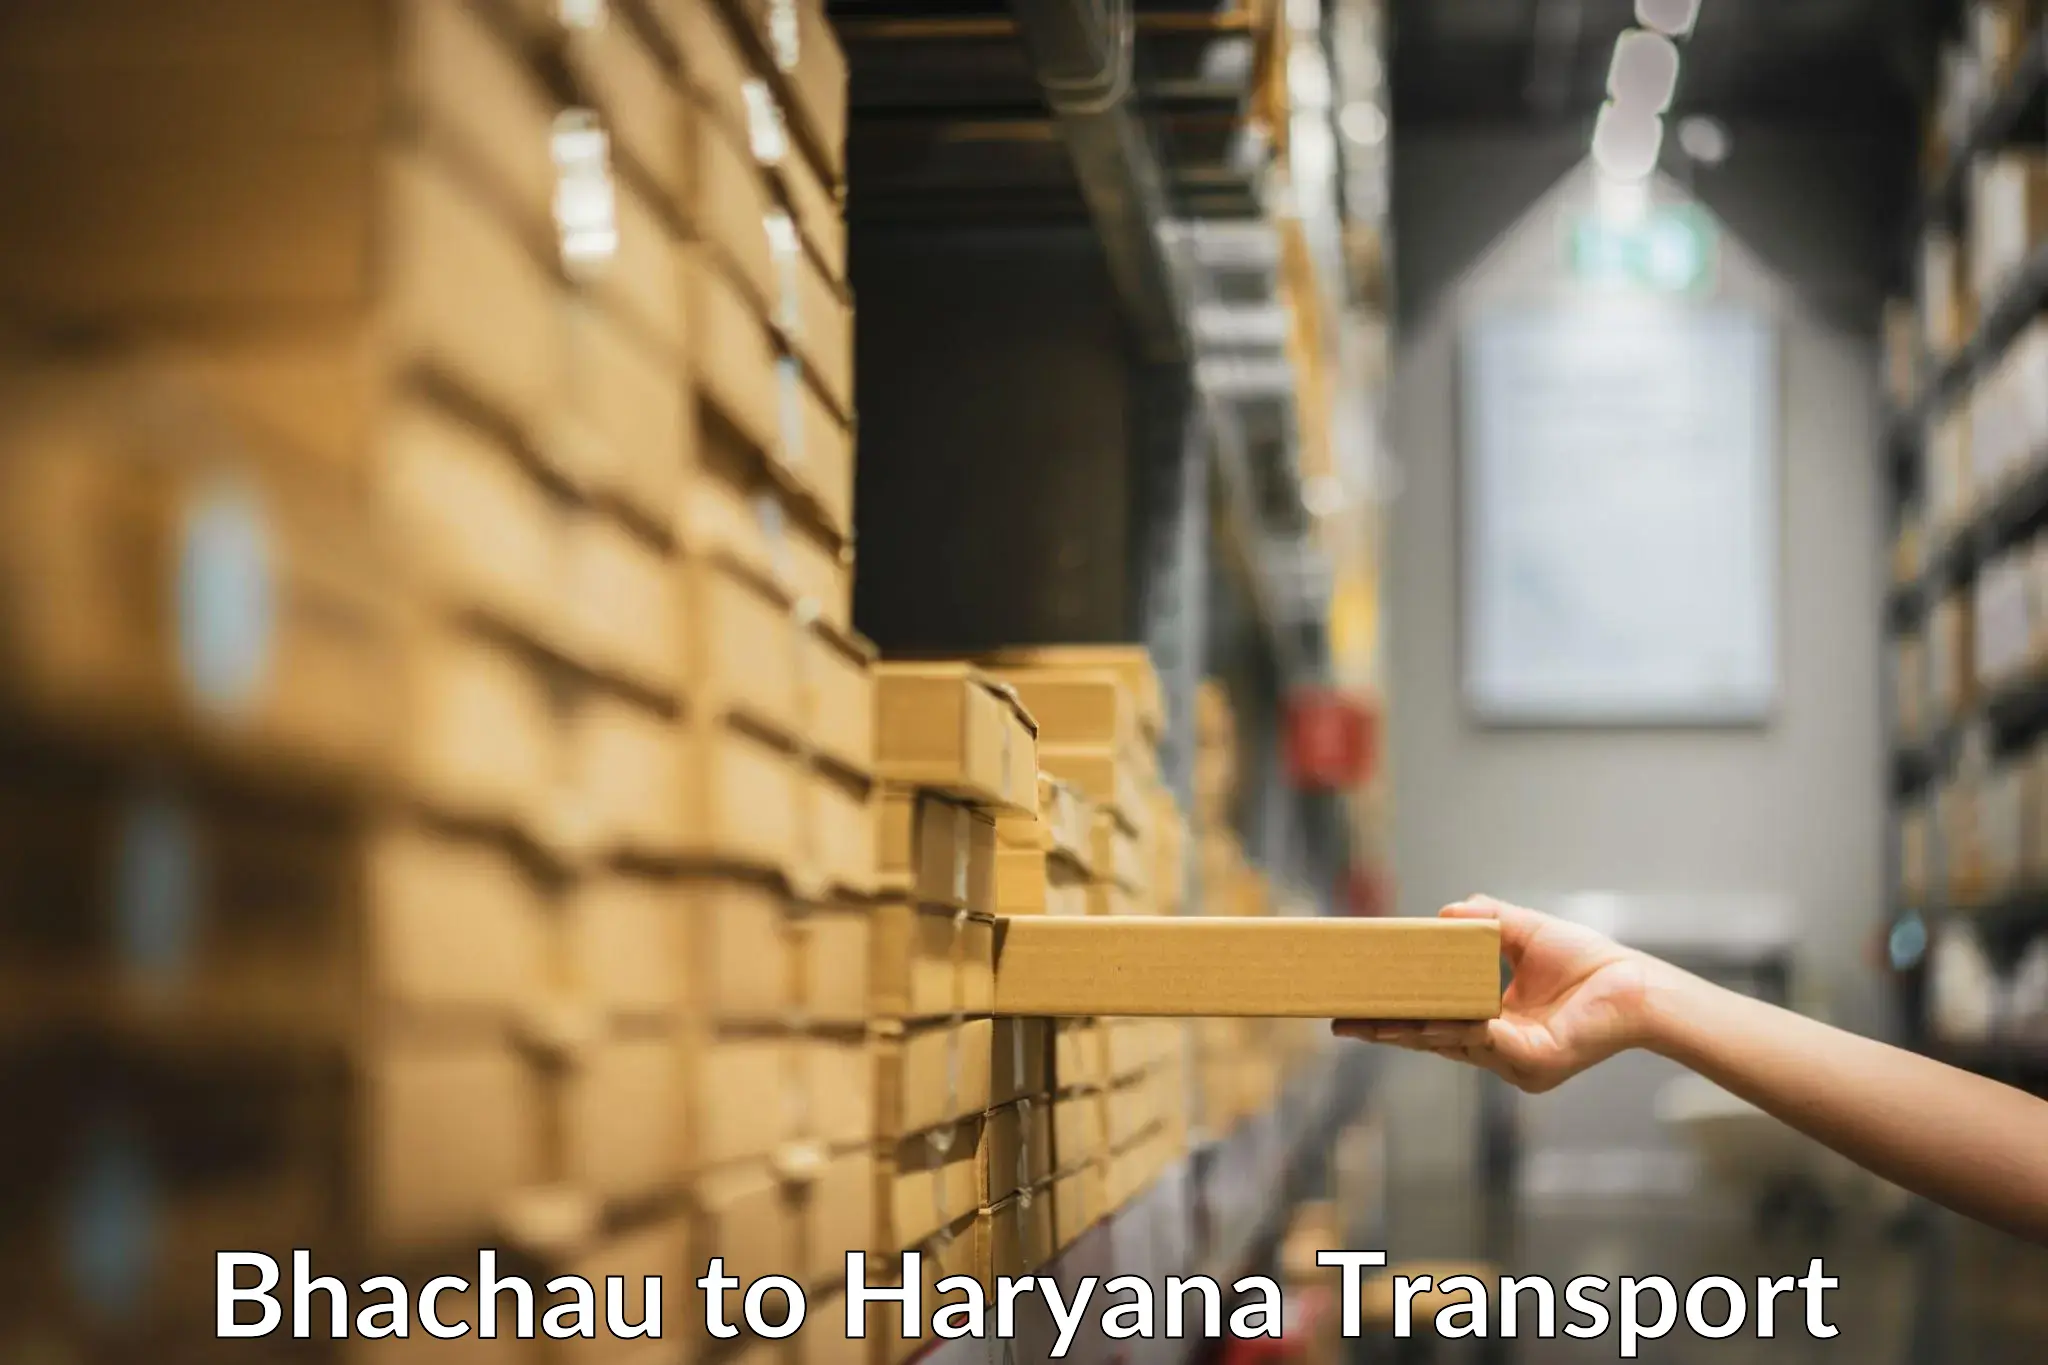 Truck transport companies in India in Bhachau to Faridabad